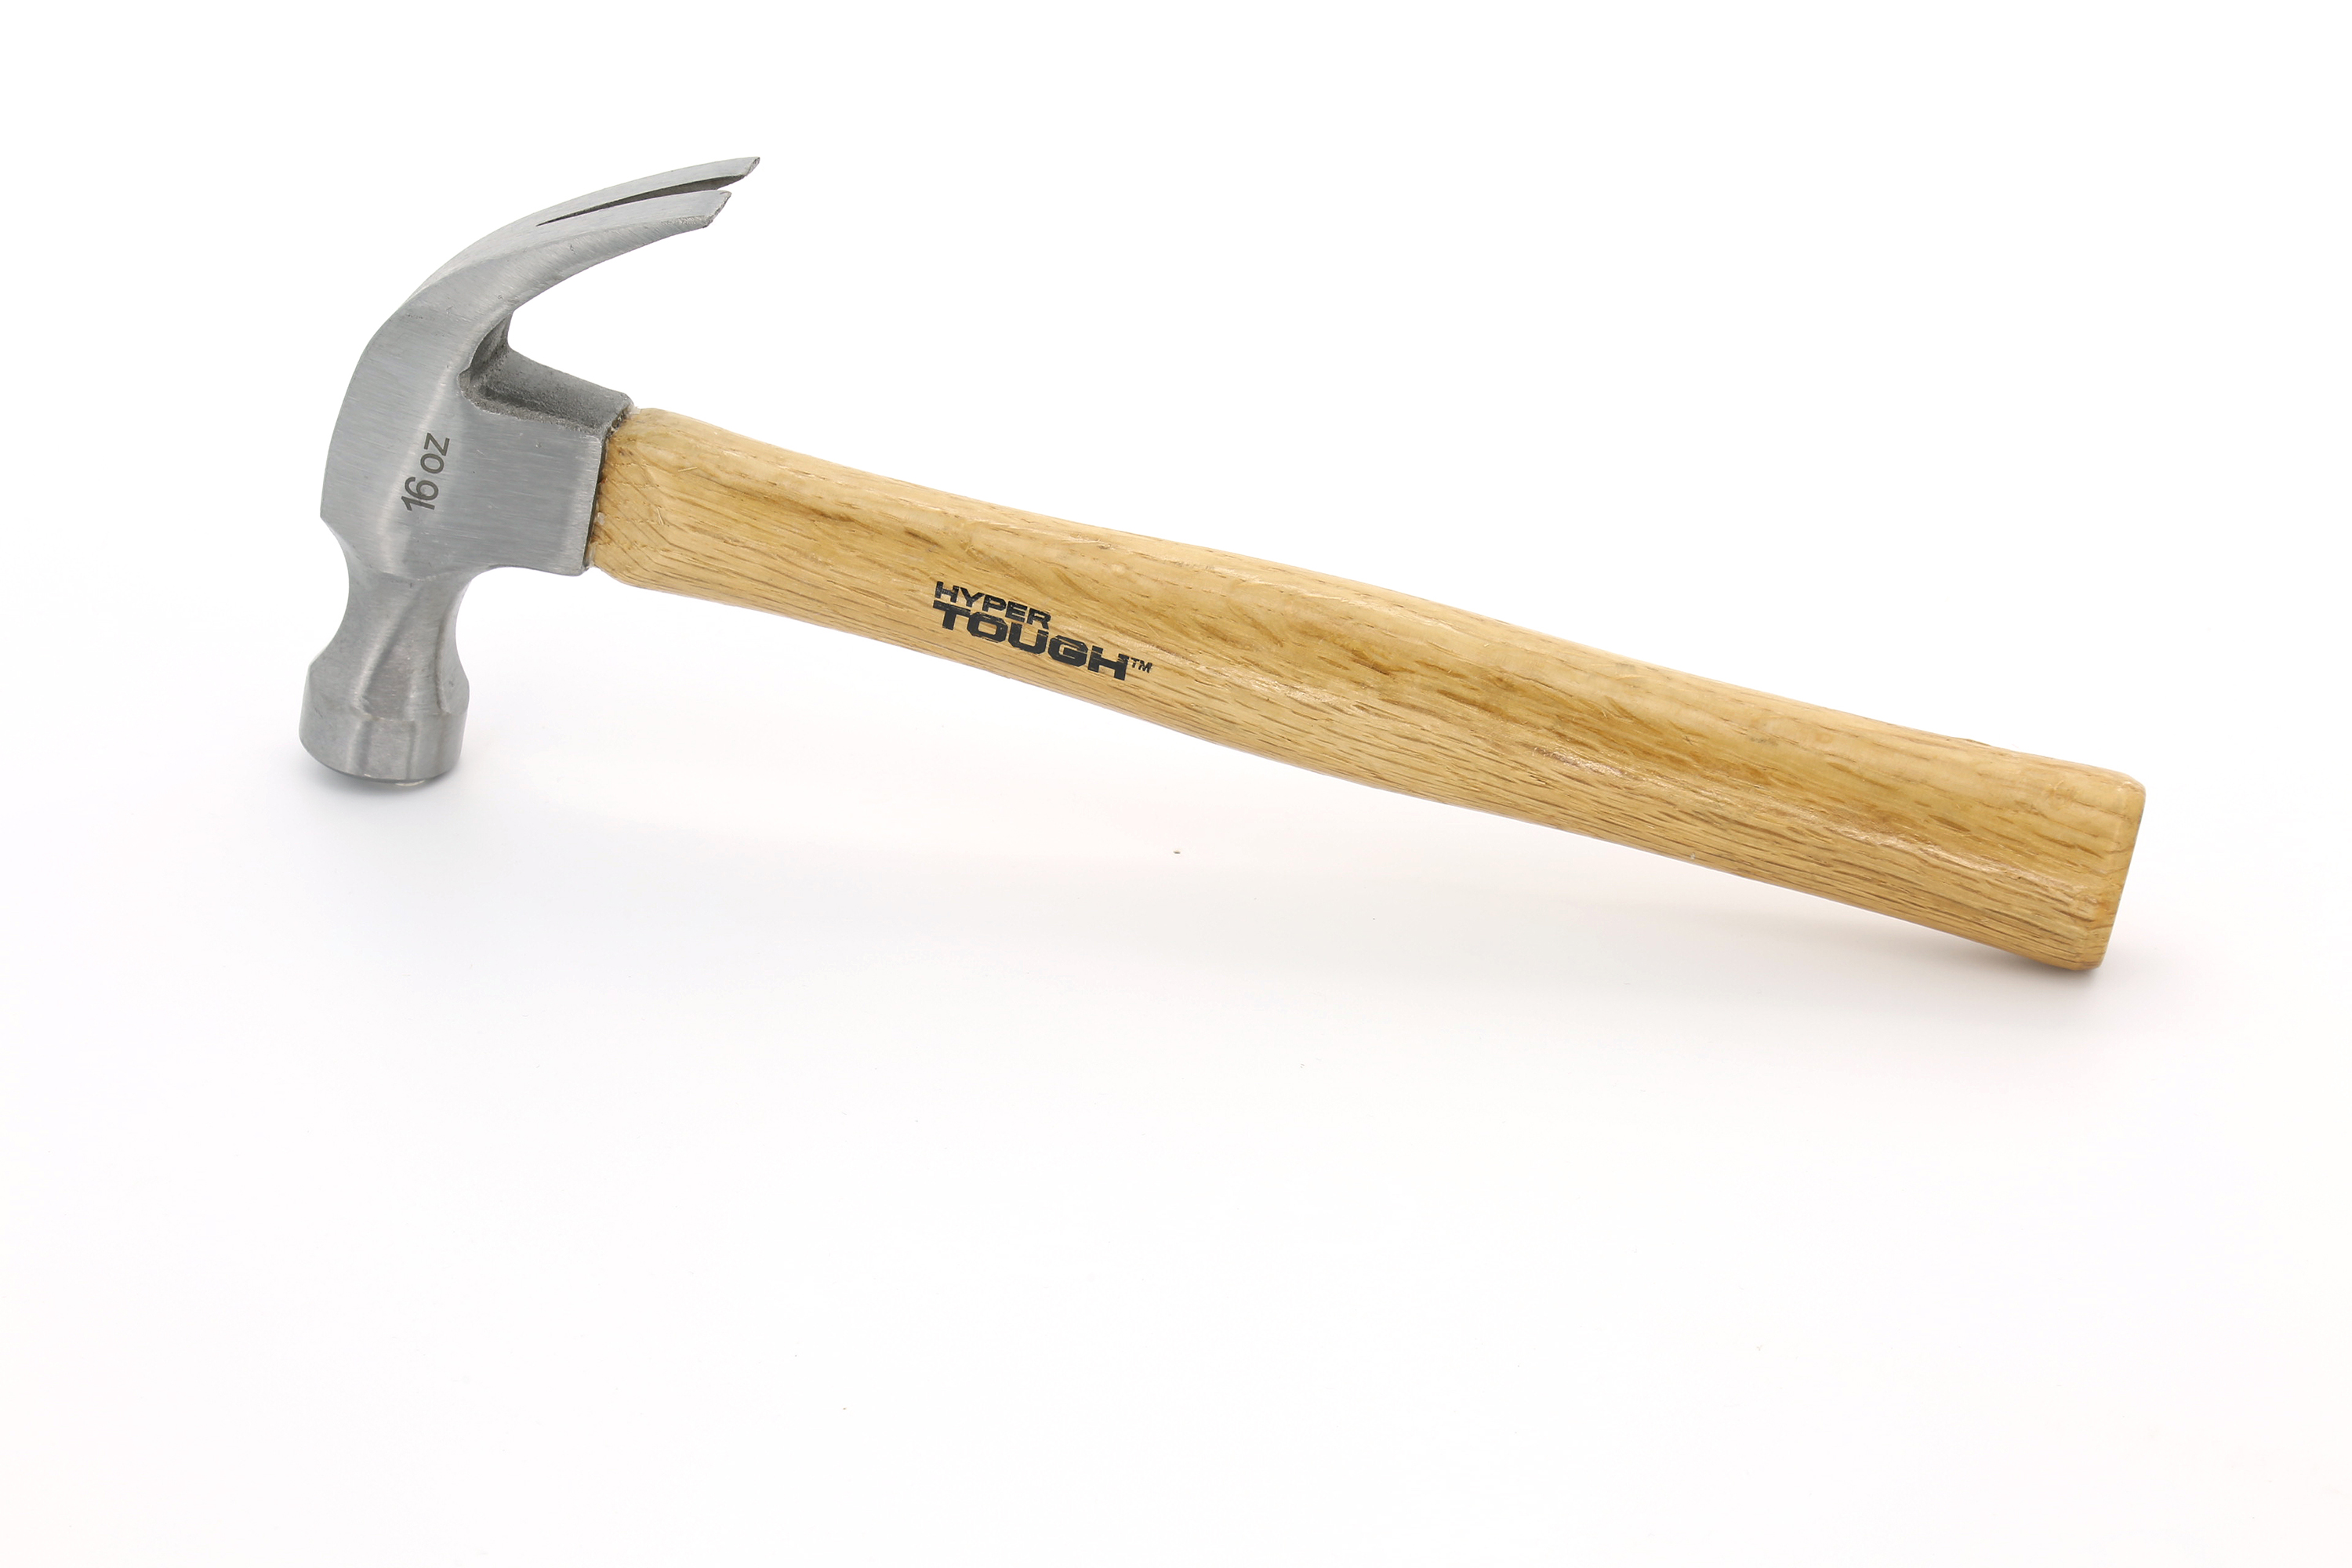 WORKPRO 16-oz Smooth Face Steel Head Wood Claw Hammer in the Hammers  department at